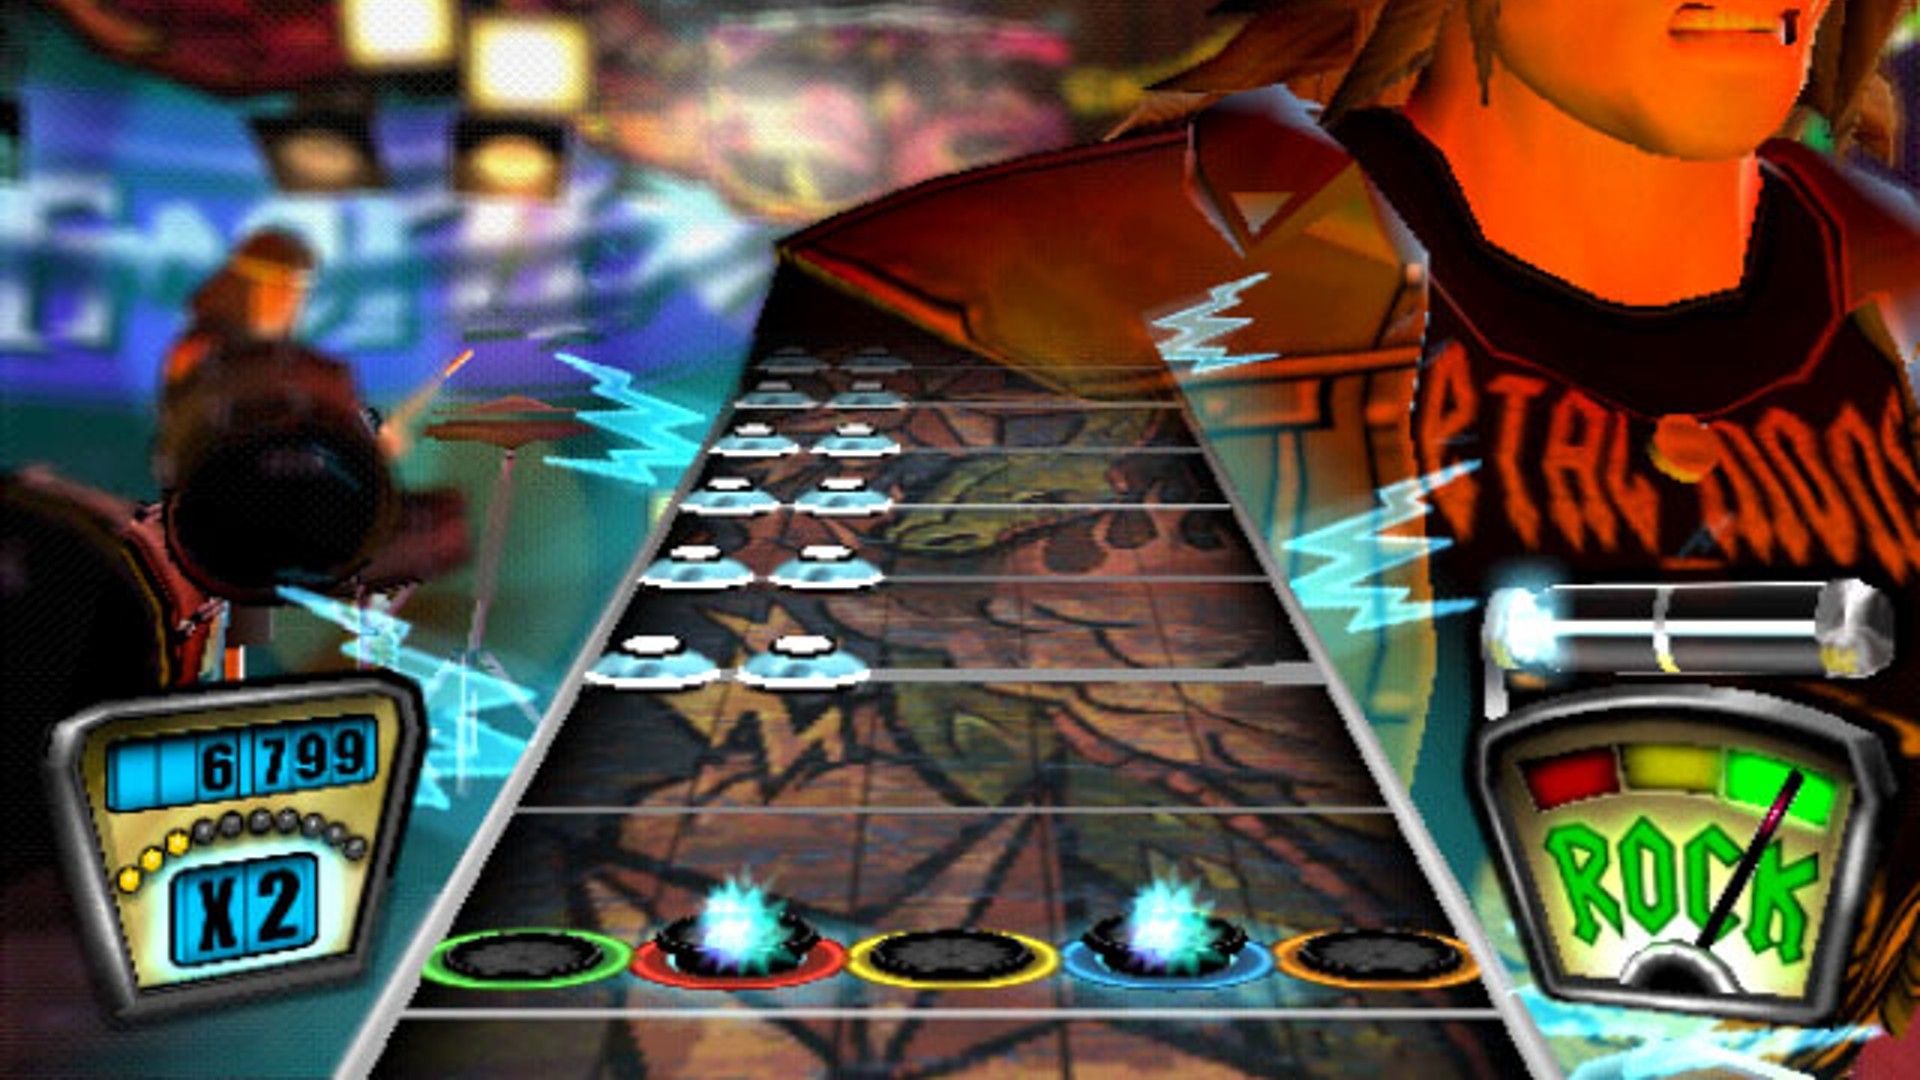 A new Guitar Hero game was discussed as part of Microsoft's Activision